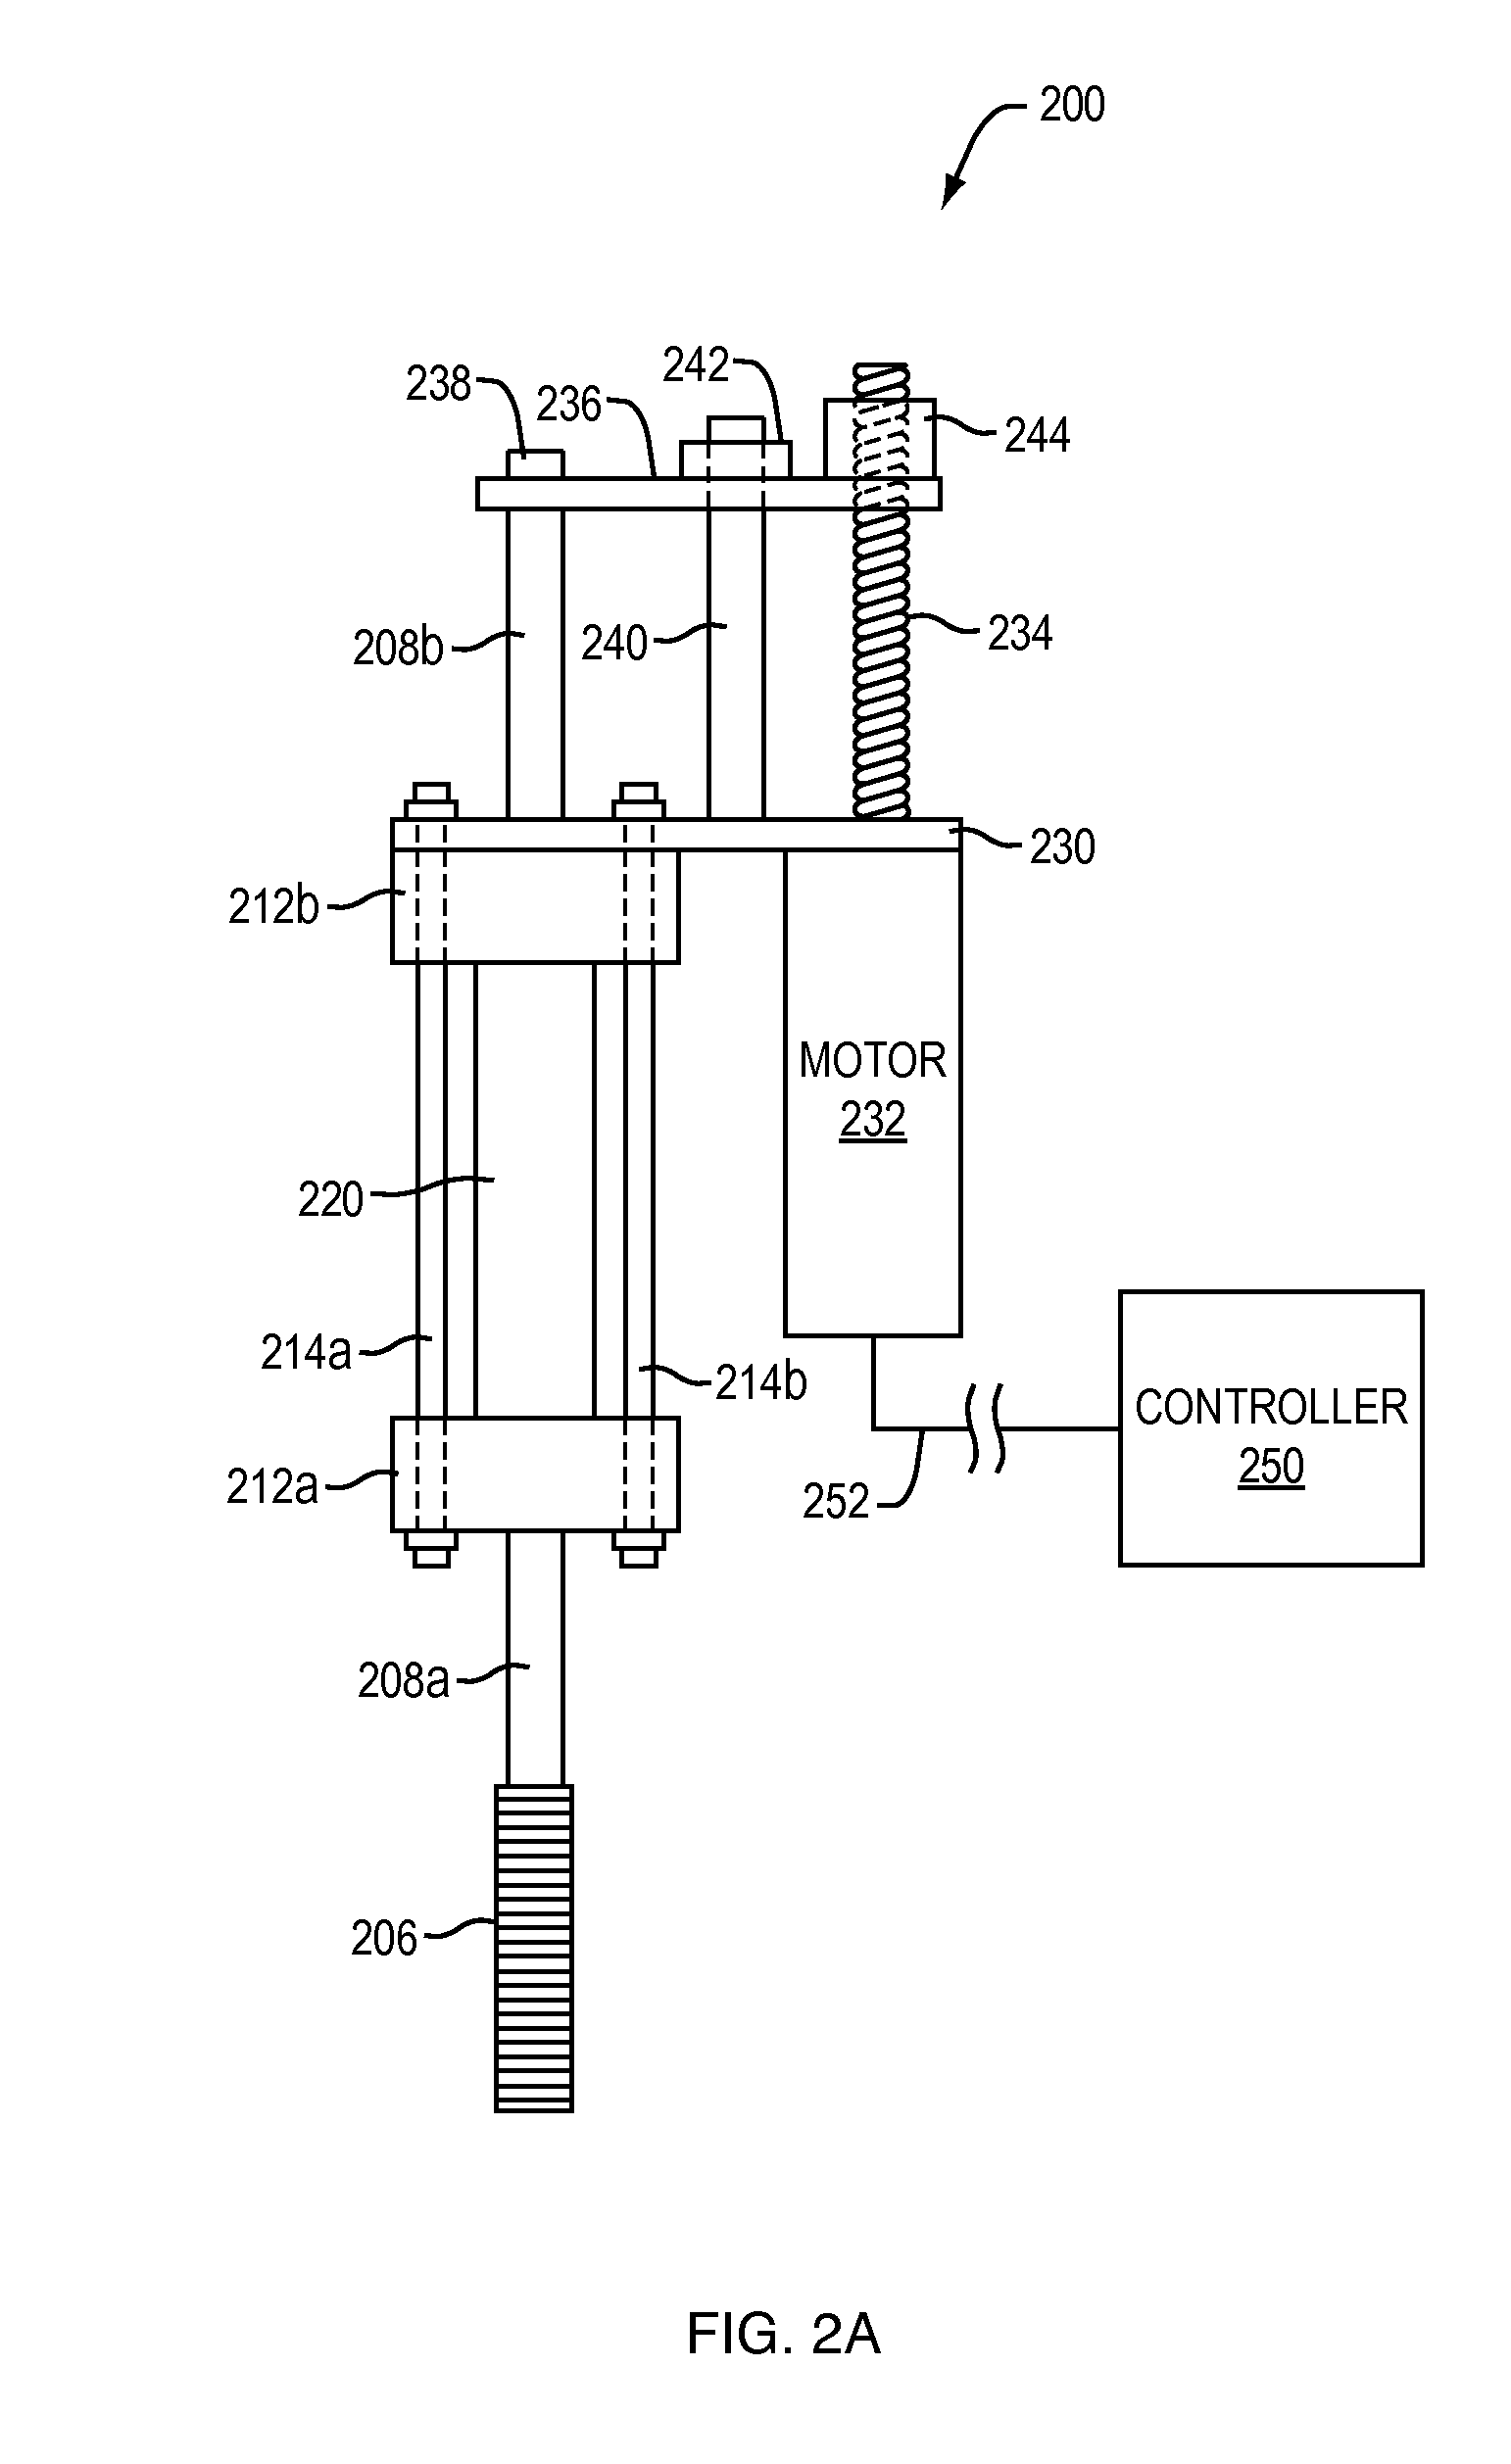 Electronic Retrofit Controller for Hydraulically Adjusted Printing Press